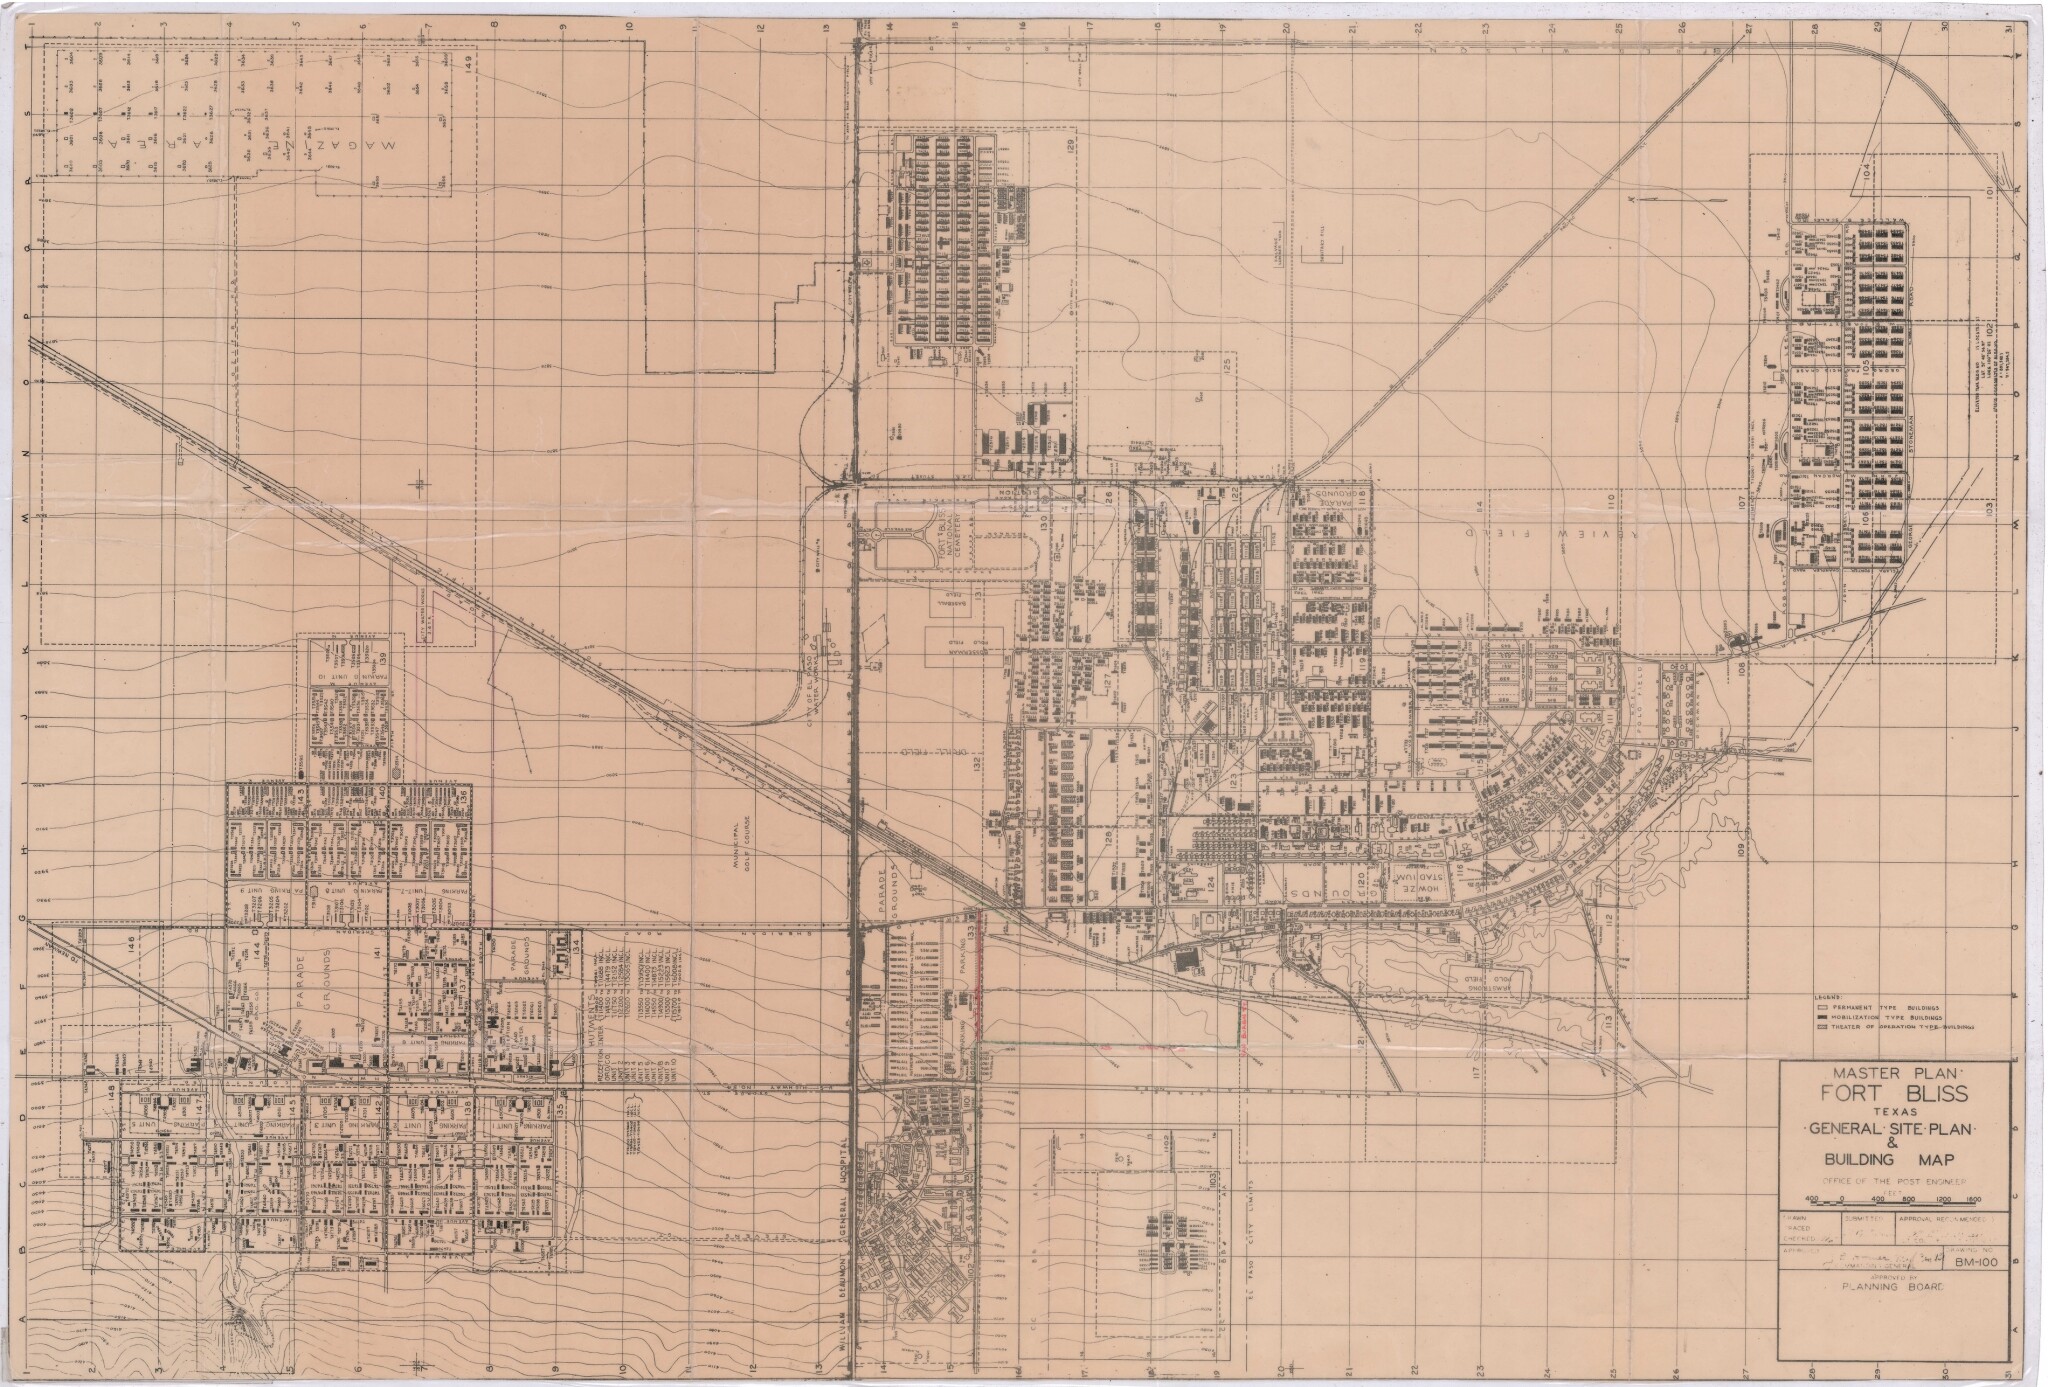 Master Plan Fort Bliss Texas General Site Plan And Building Map DIGIE